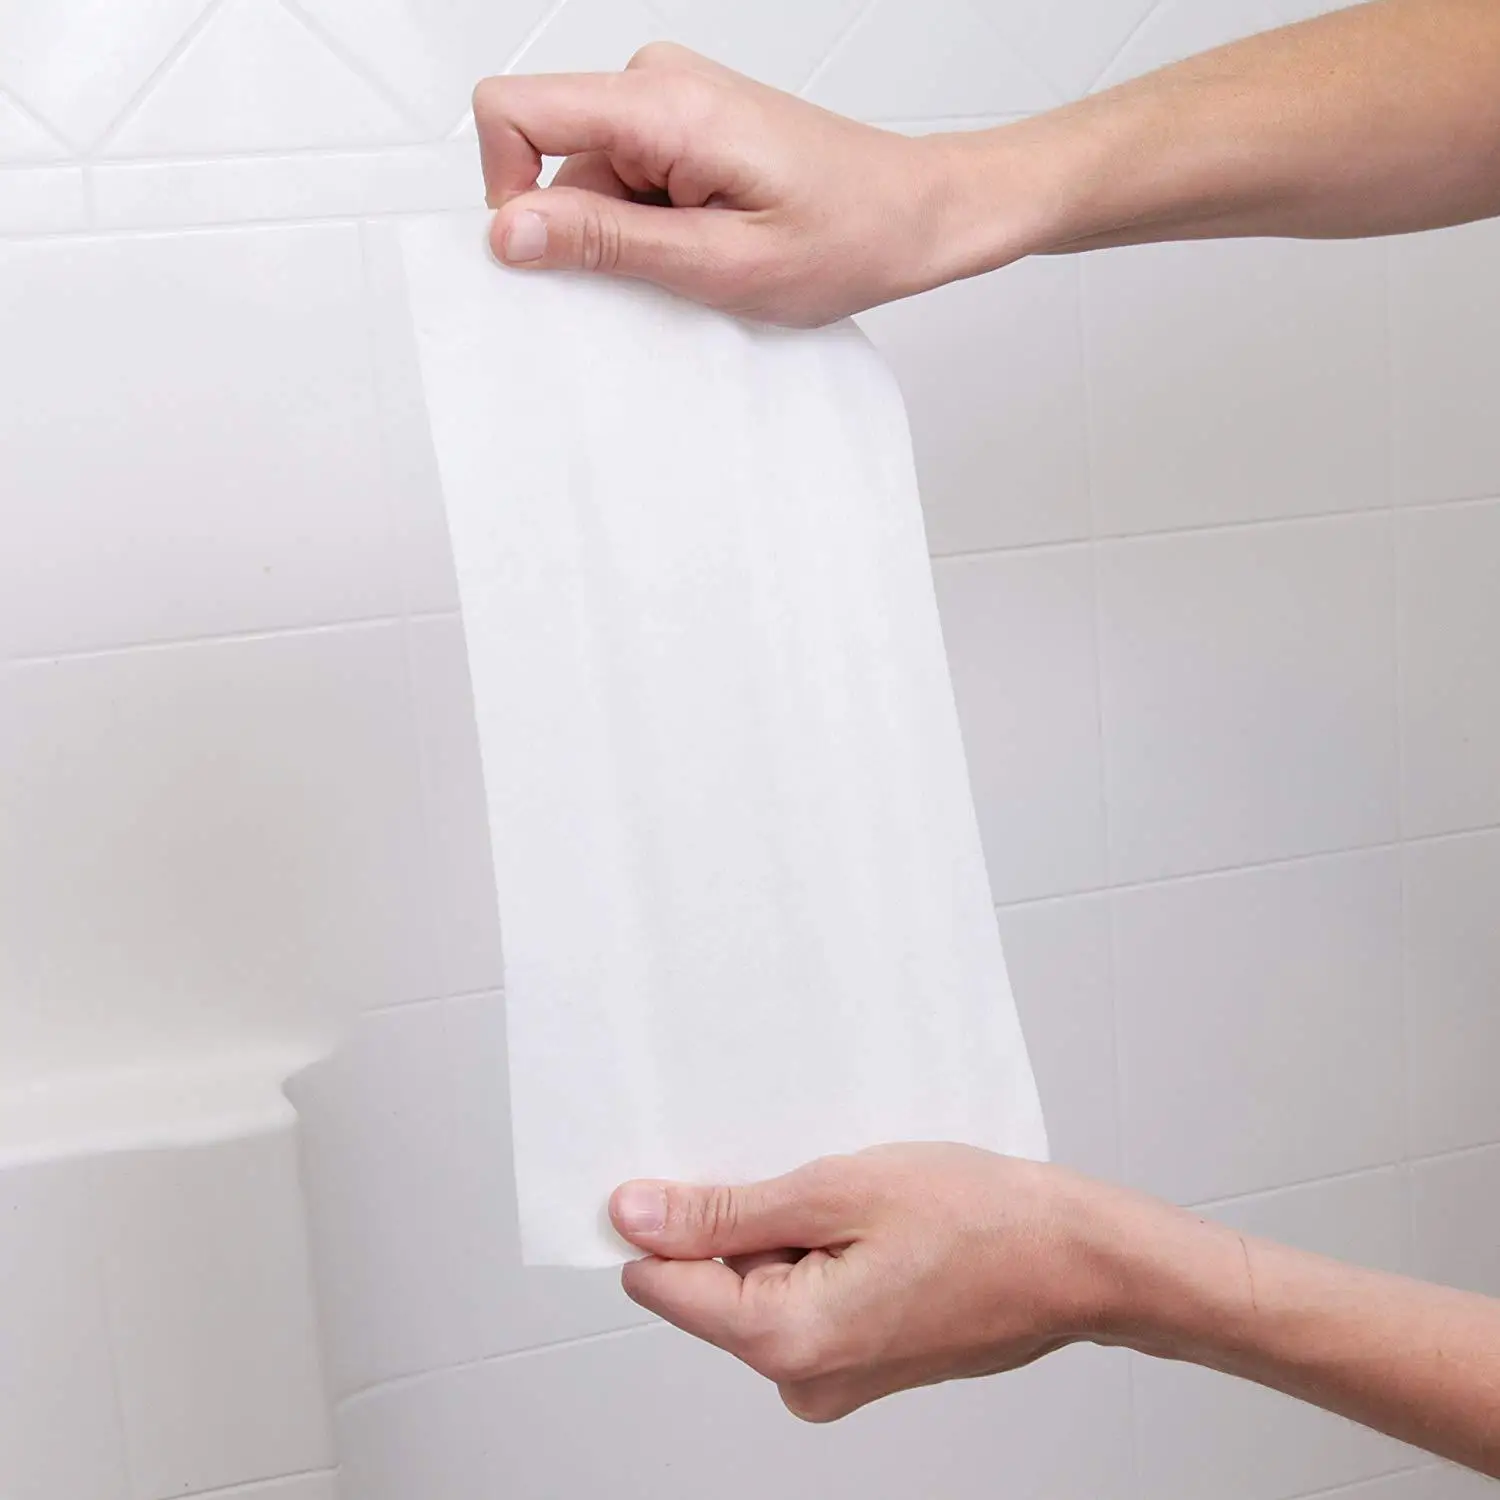 
Hot Selling On Amazon Freely Sample Tensile Fabric Membrane For Shower, Tiling and Flooring Projects 